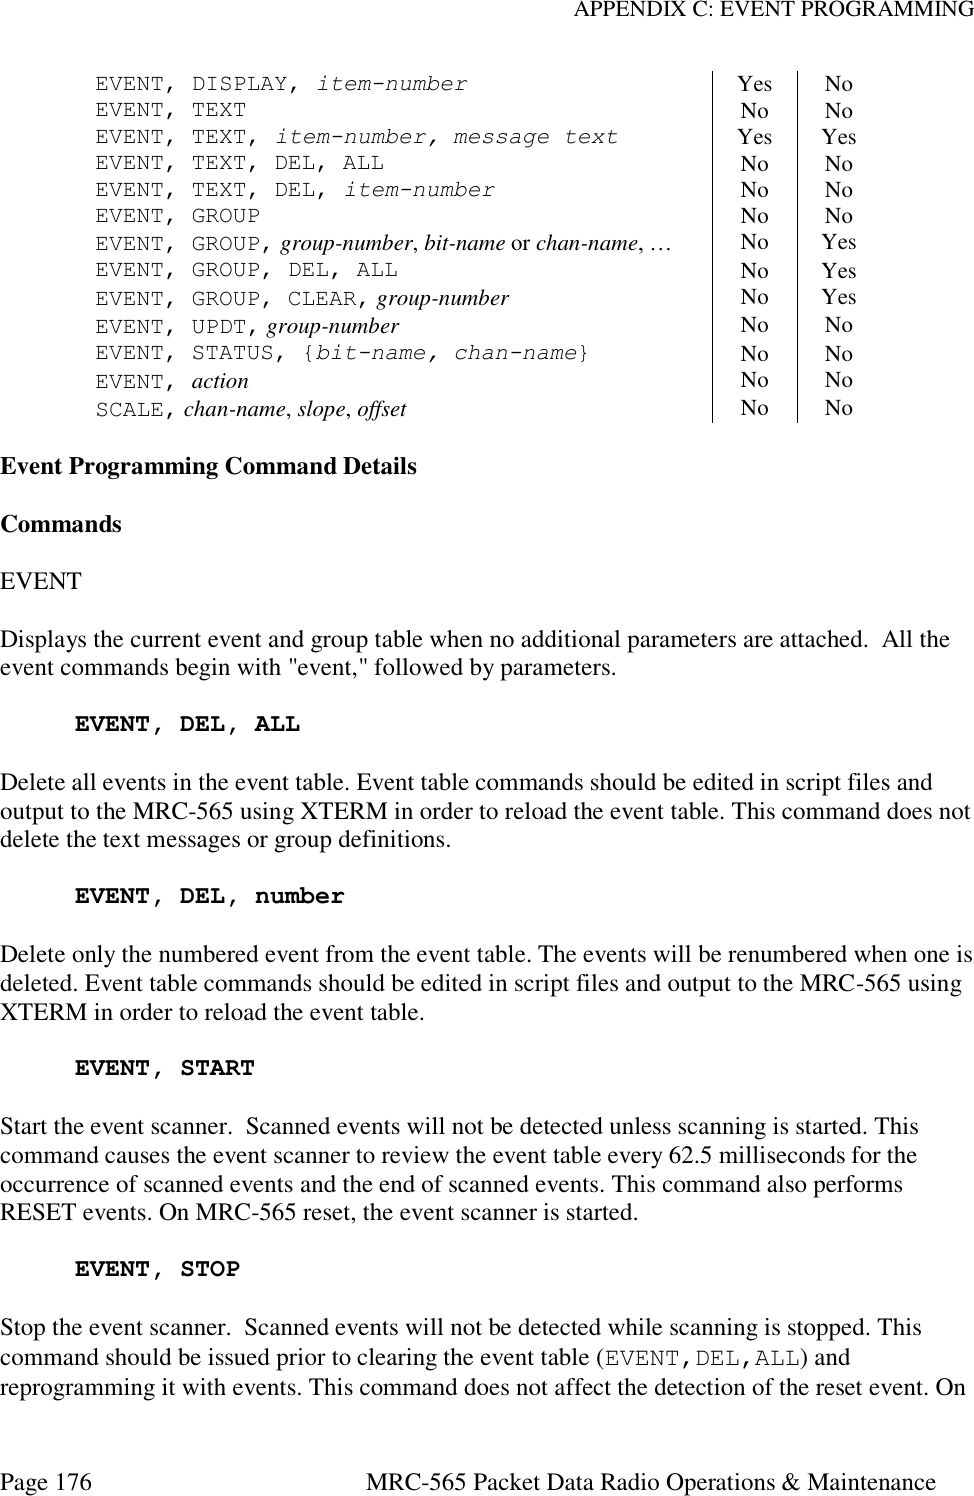 APPENDIX C: EVENT PROGRAMMING Page 176  MRC-565 Packet Data Radio Operations &amp; Maintenance EVENT, DISPLAY, item-number Yes No EVENT, TEXT No No EVENT, TEXT, item-number, message text Yes Yes EVENT, TEXT, DEL, ALL No No EVENT, TEXT, DEL, item-number No No EVENT, GROUP No No EVENT, GROUP, group-number, bit-name or chan-name, …  No Yes EVENT, GROUP, DEL, ALL No Yes EVENT, GROUP, CLEAR, group-number No Yes EVENT, UPDT, group-number No No EVENT, STATUS, {bit-name, chan-name} No No EVENT, action No No SCALE, chan-name, slope, offset No No  Event Programming Command Details  Commands  EVENT  Displays the current event and group table when no additional parameters are attached.  All the event commands begin with &quot;event,&quot; followed by parameters.  EVENT, DEL, ALL  Delete all events in the event table. Event table commands should be edited in script files and output to the MRC-565 using XTERM in order to reload the event table. This command does not delete the text messages or group definitions.  EVENT, DEL, number  Delete only the numbered event from the event table. The events will be renumbered when one is deleted. Event table commands should be edited in script files and output to the MRC-565 using XTERM in order to reload the event table.  EVENT, START  Start the event scanner.  Scanned events will not be detected unless scanning is started. This command causes the event scanner to review the event table every 62.5 milliseconds for the occurrence of scanned events and the end of scanned events. This command also performs RESET events. On MRC-565 reset, the event scanner is started.  EVENT, STOP  Stop the event scanner.  Scanned events will not be detected while scanning is stopped. This command should be issued prior to clearing the event table (EVENT,DEL,ALL) and reprogramming it with events. This command does not affect the detection of the reset event. On 